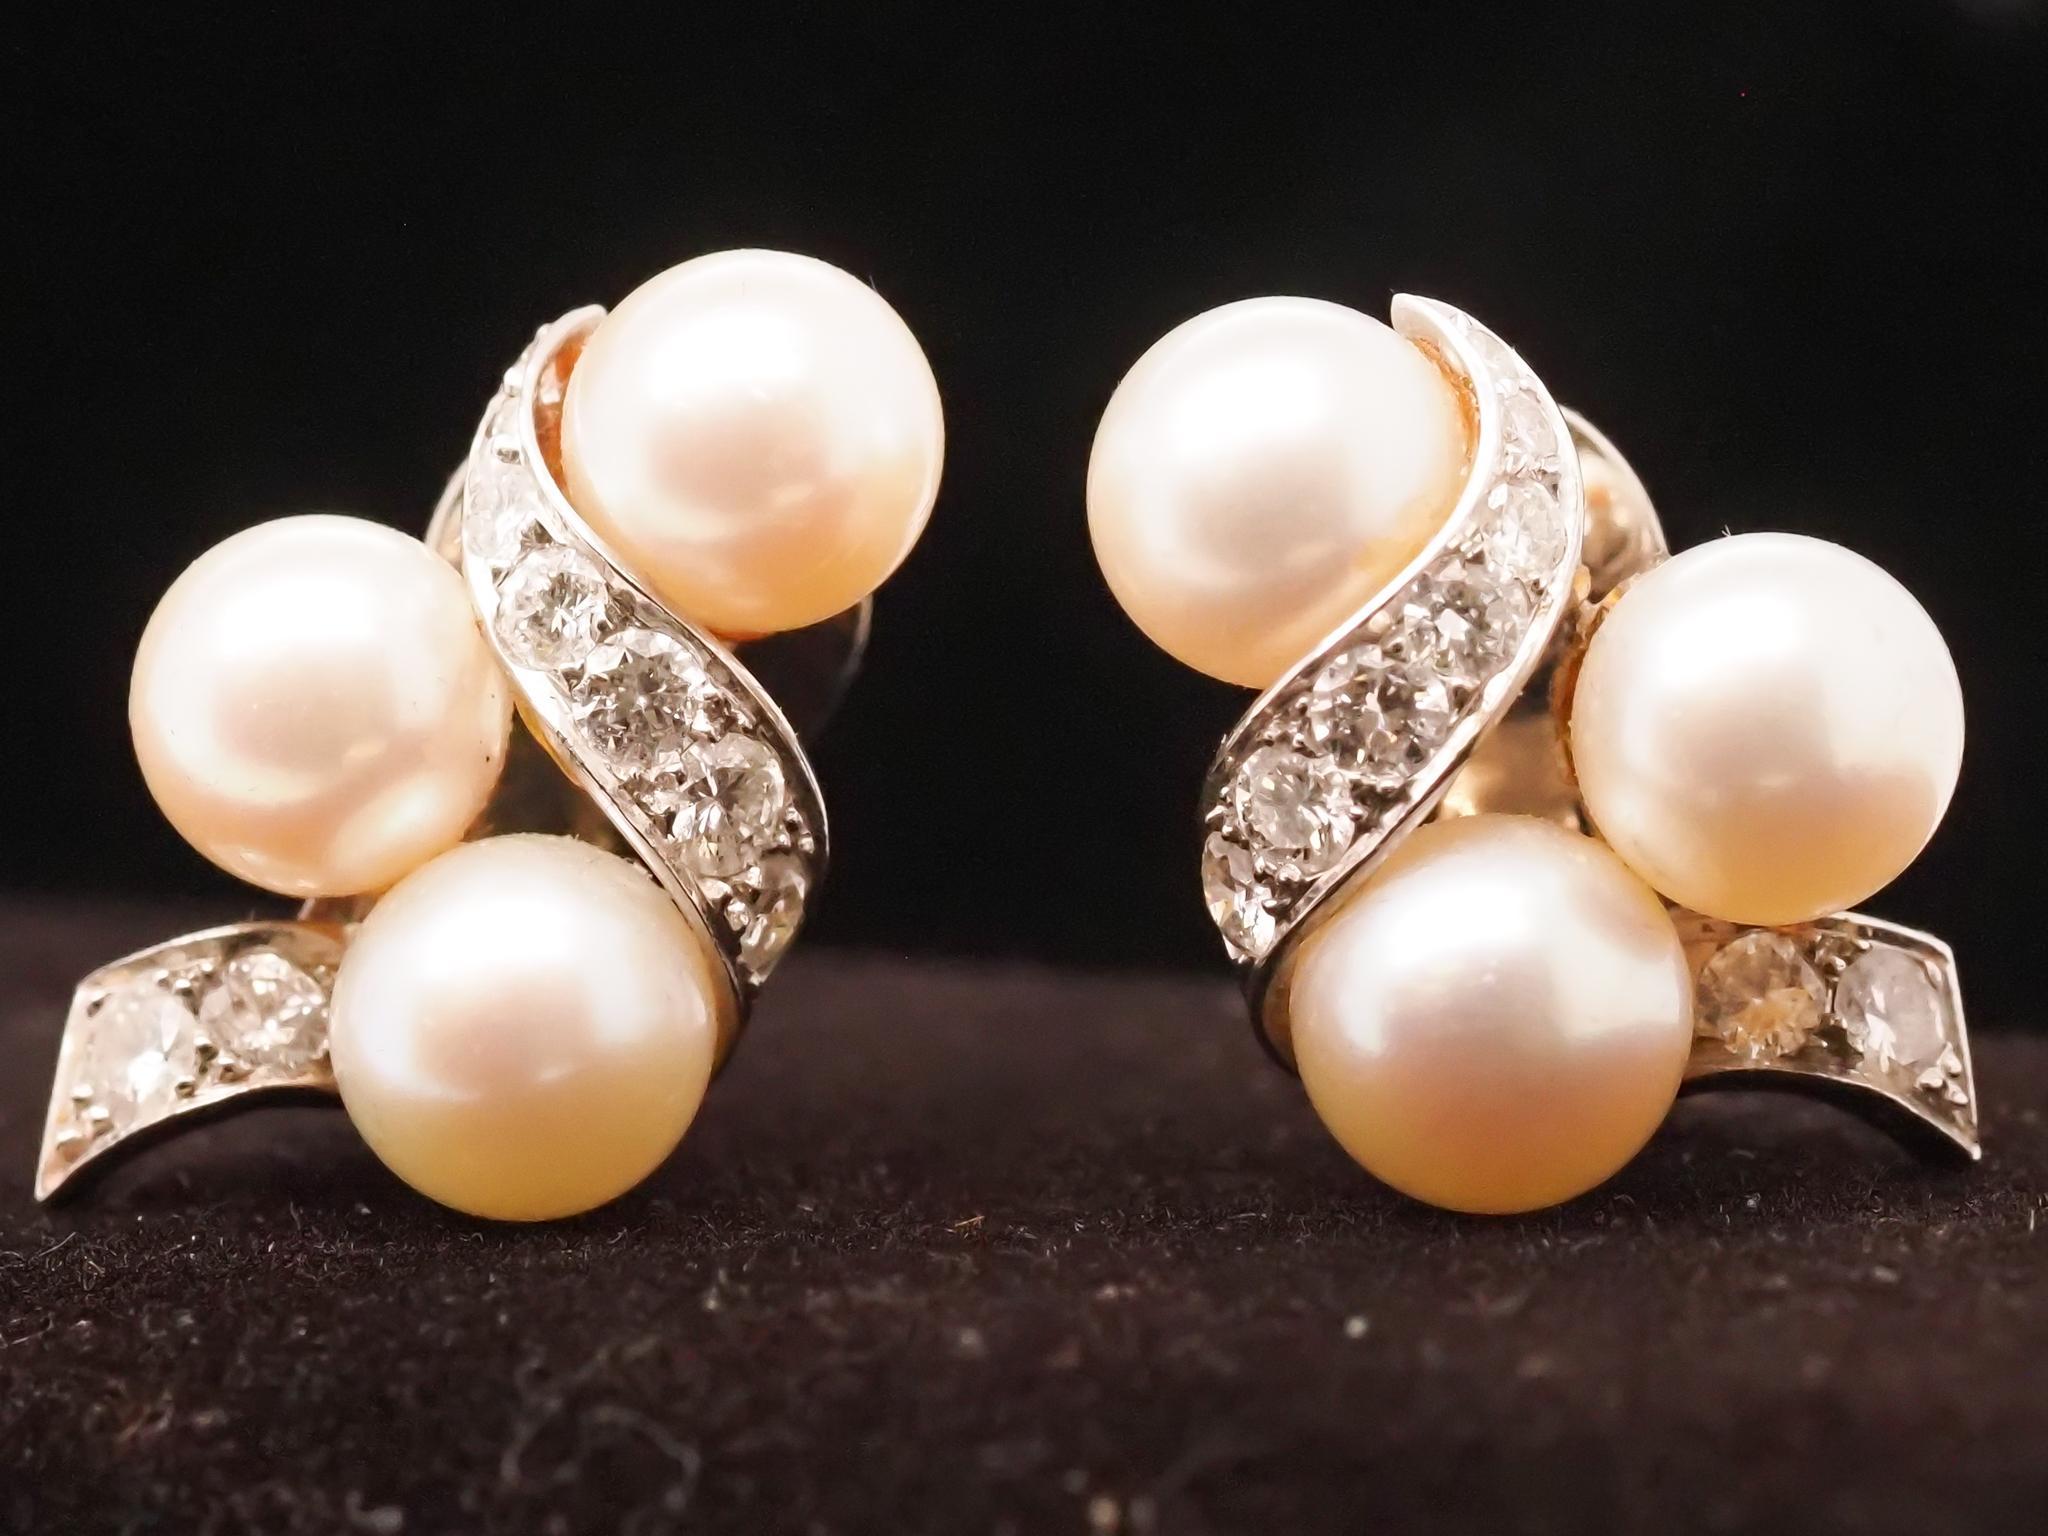 Year: 1980s
Item Details:
Metal Type: 14K White Gold [Hallmarked, and Tested]
Weight: 5.5 grams
Diamond Details:
Weight: .40ct total weight
Cut: Round brilliant
Color: G
Clarity: VS
Pearl Details:
Size: 7mm each
Cut: Round Pearl
Color: